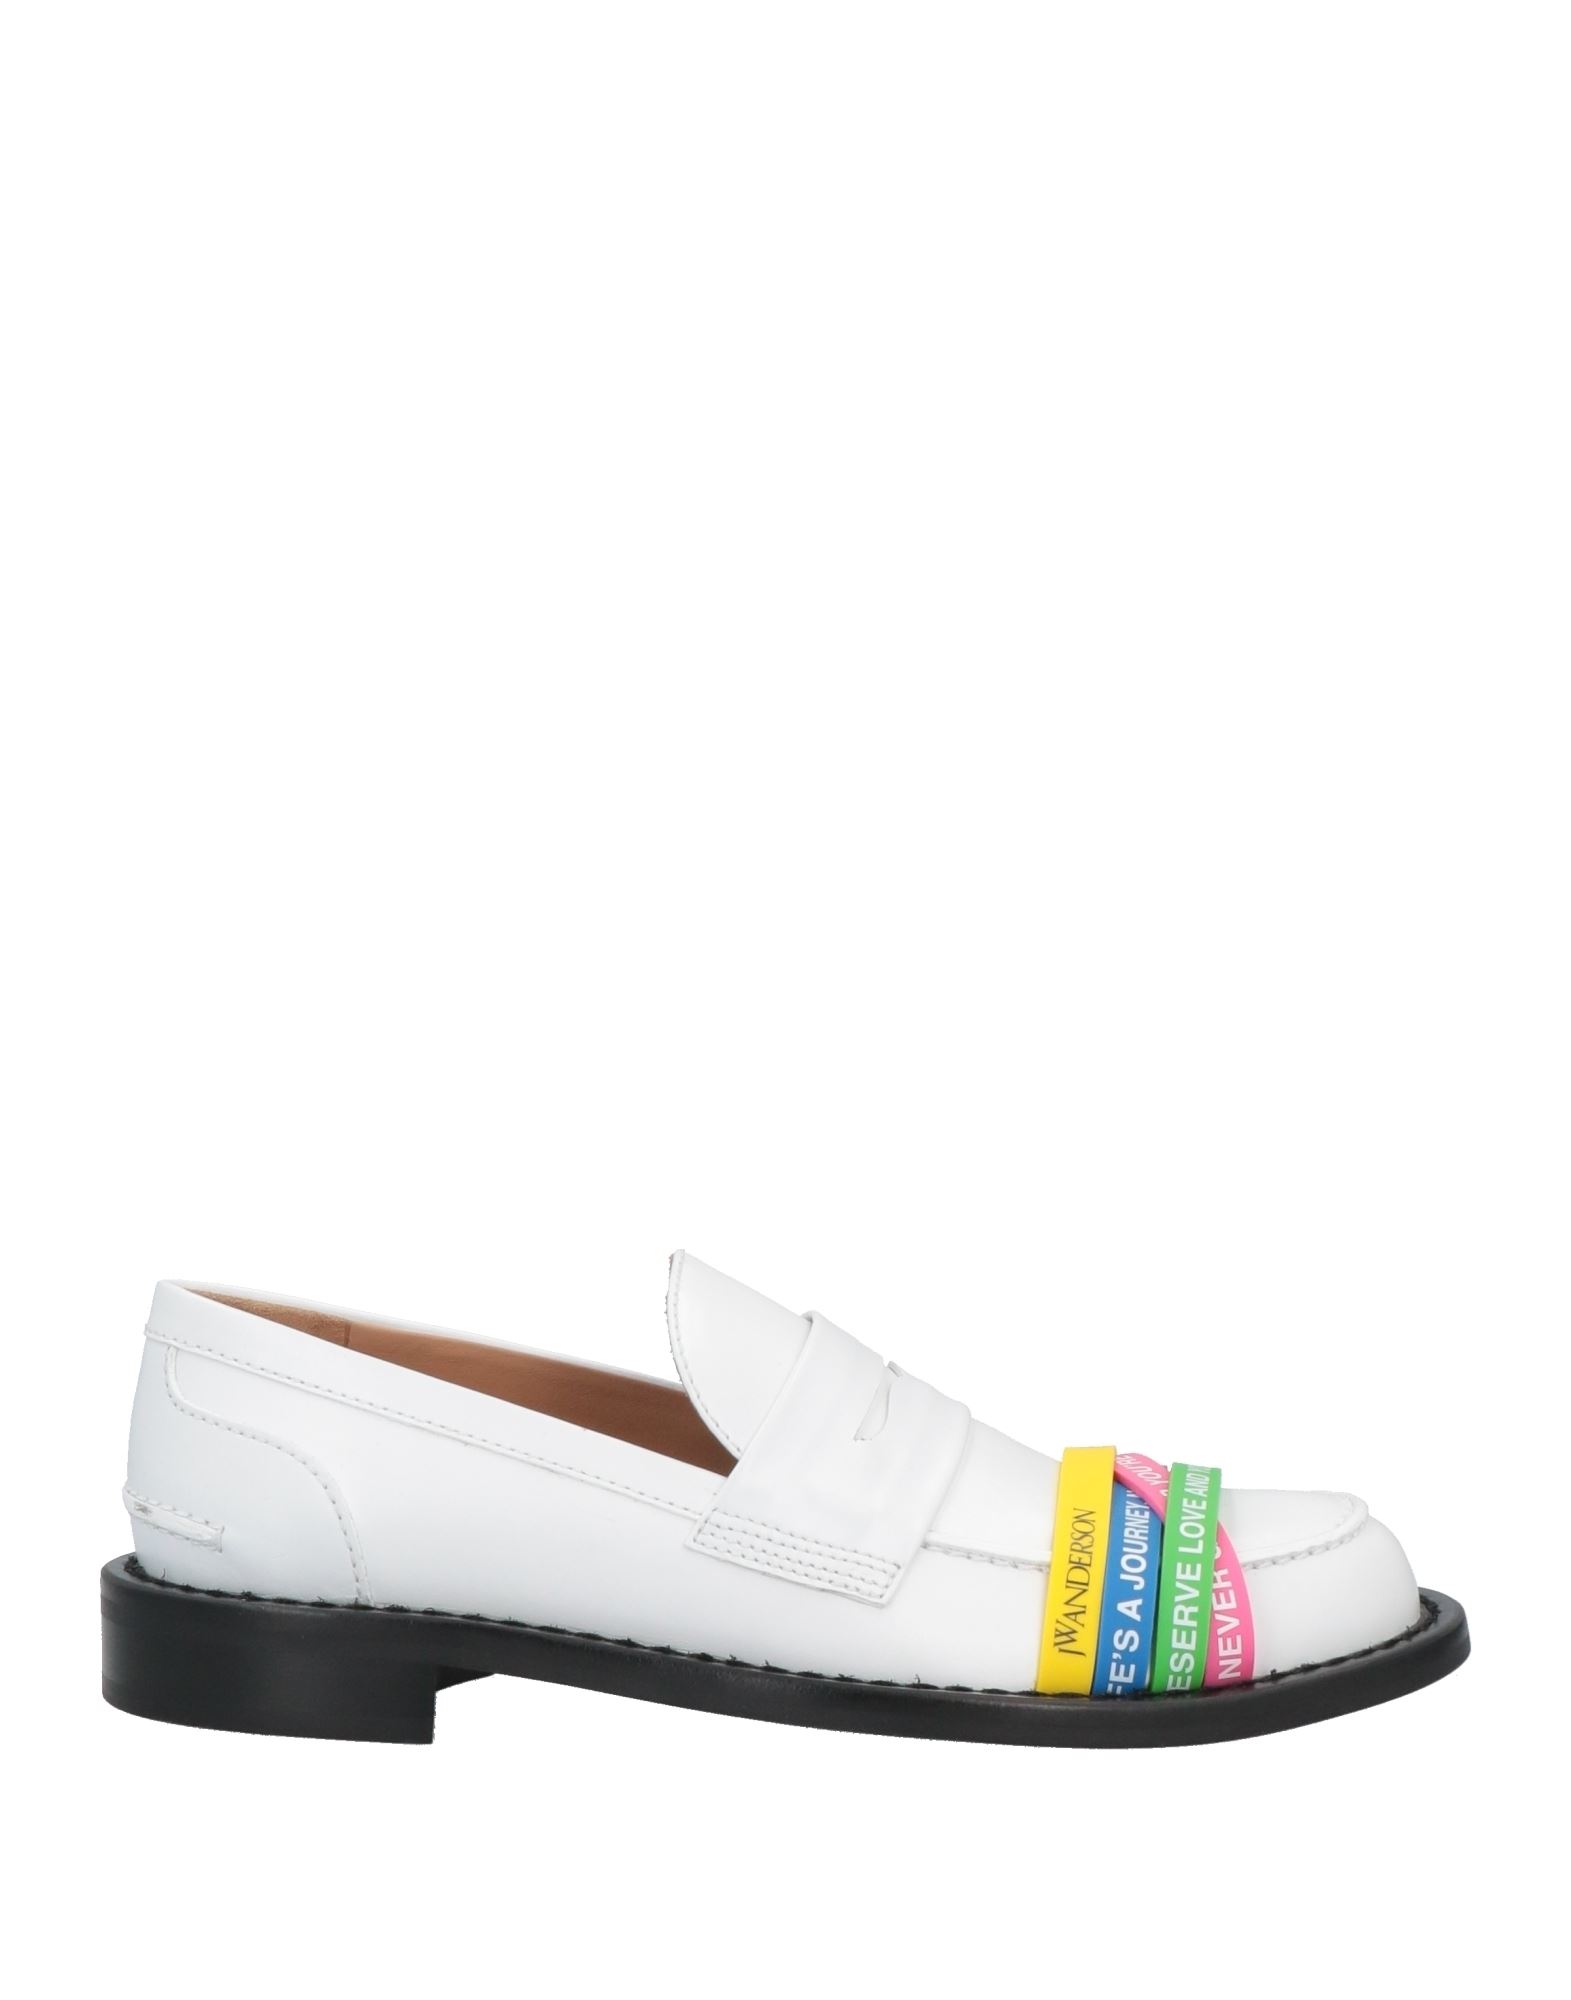 Shop Jw Anderson Woman Loafers White Size 8 Calfskin